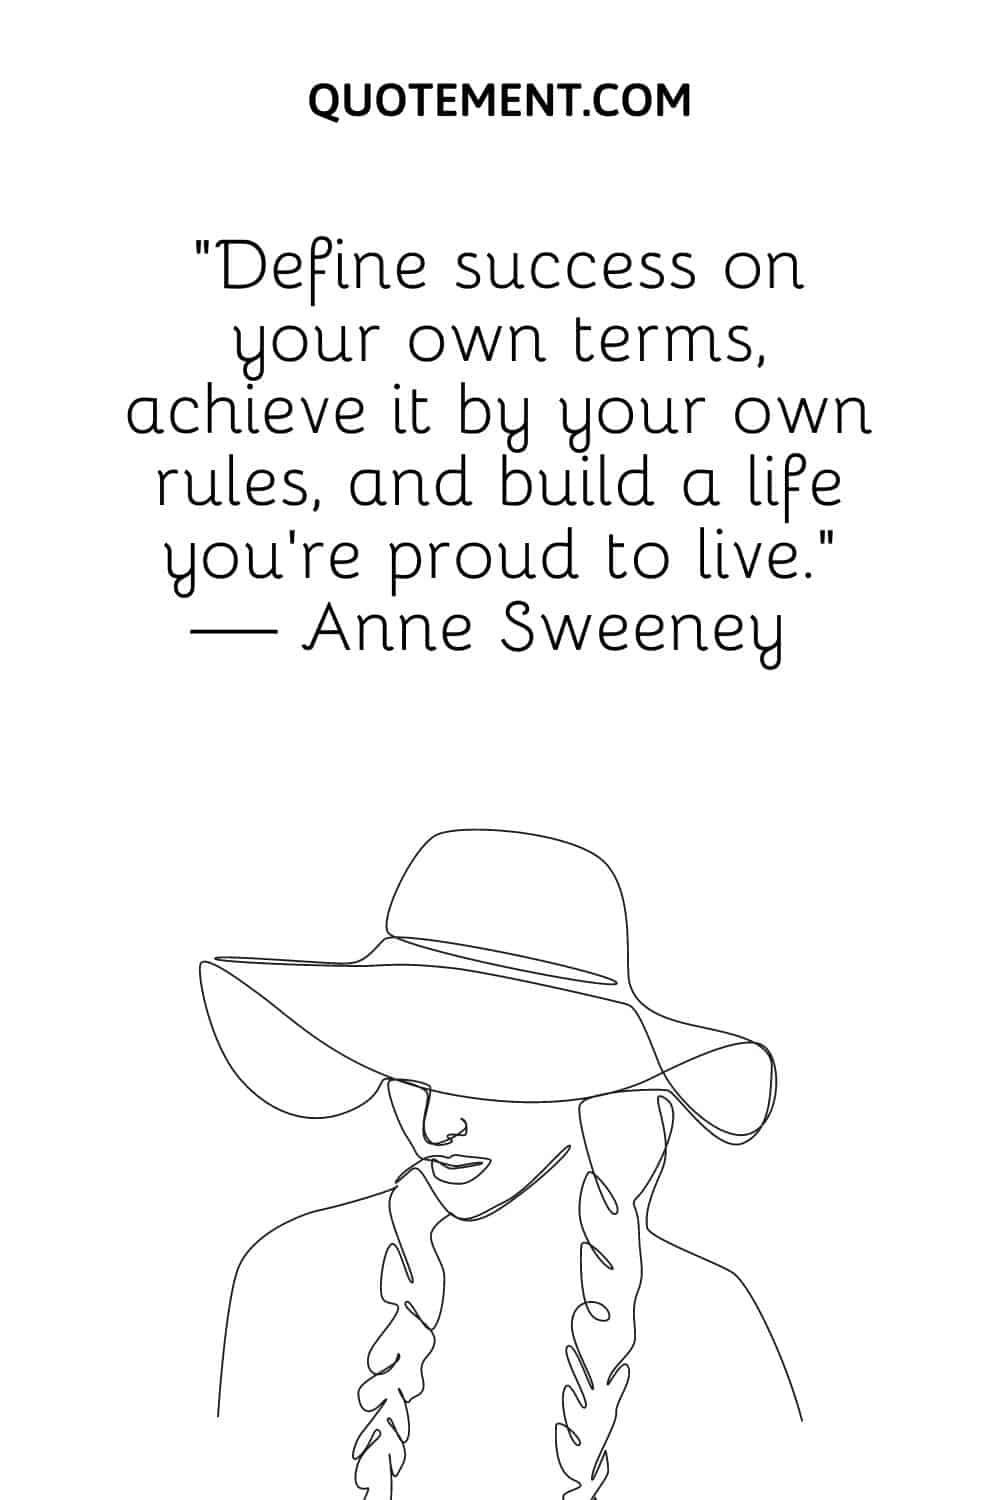 Define success on your own terms, achieve it by your own rules, and build a life you’re proud to live